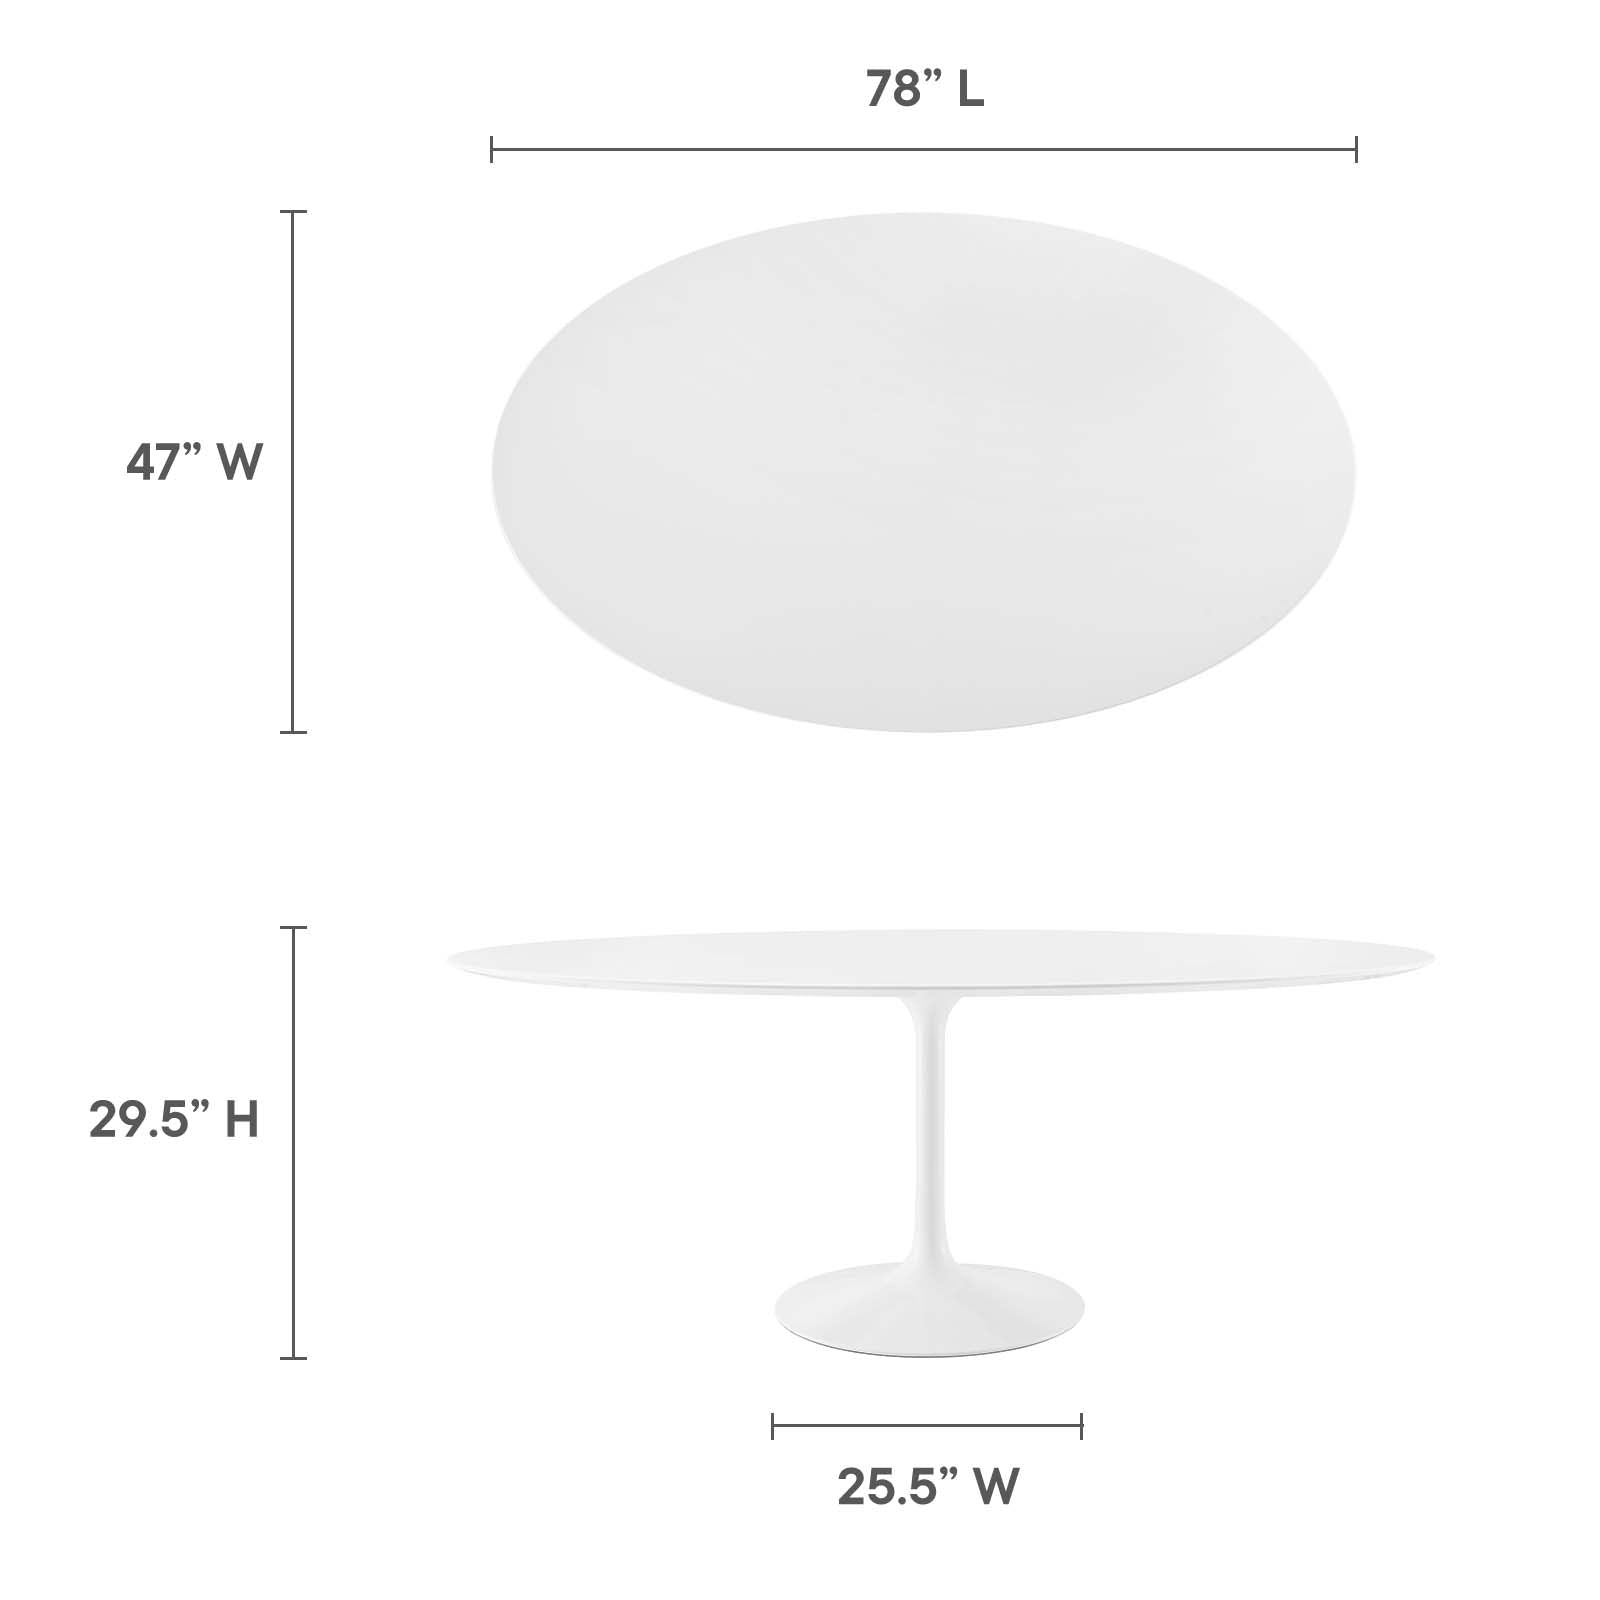 Lippa 78" Oval Wood Top Dining Table - East Shore Modern Home Furnishings